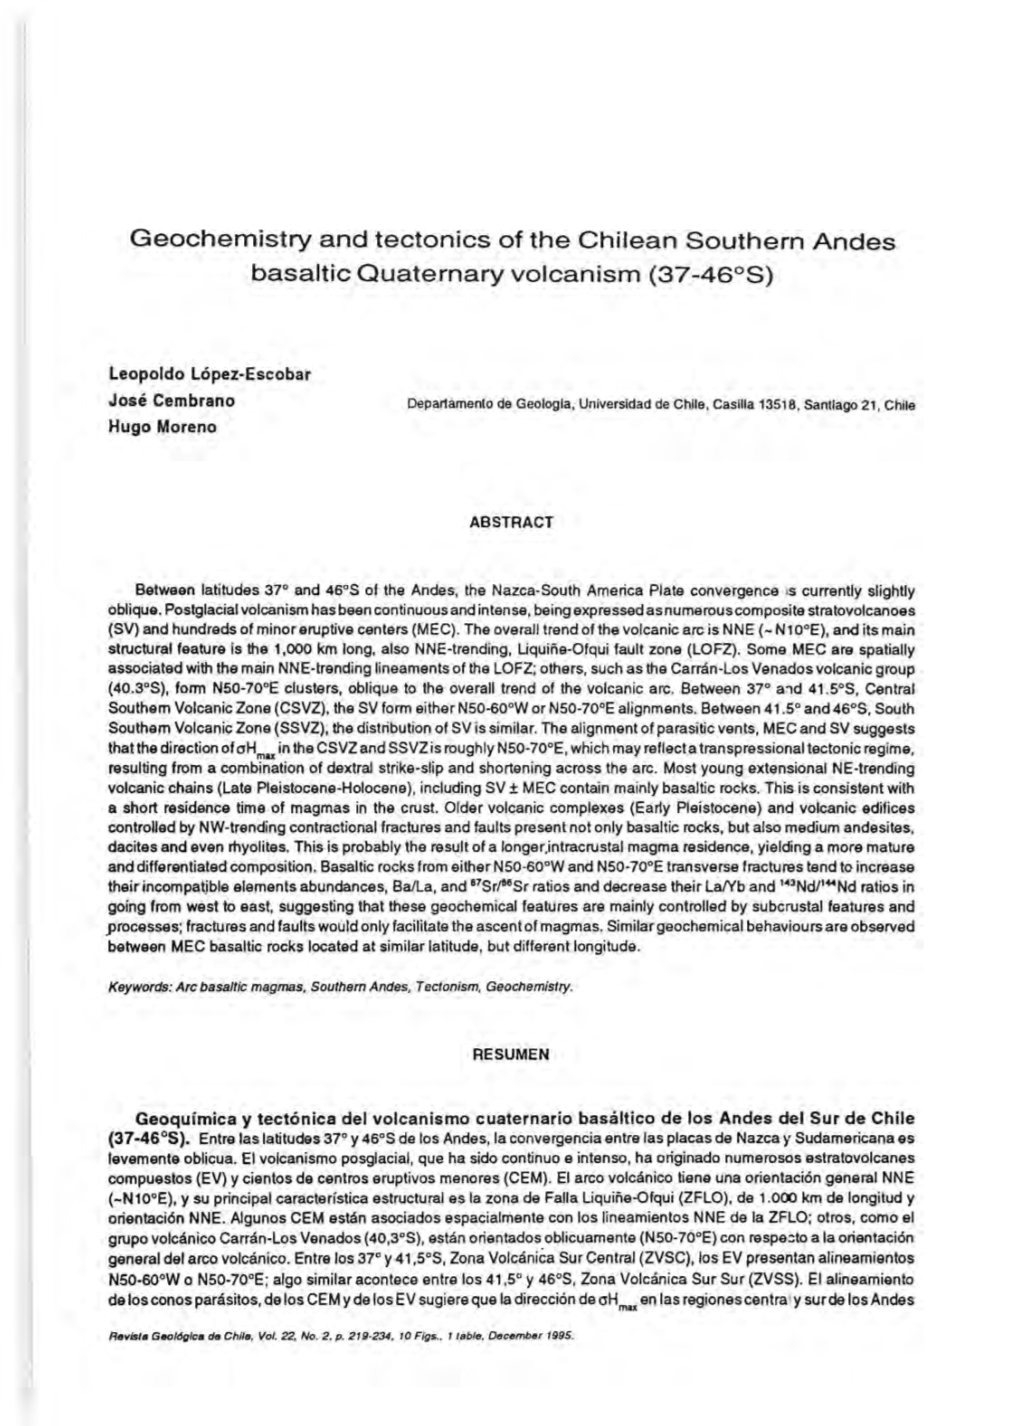 Geochemistry and Tectonics of the Chilean 80Uthern Andes Basaltic Quaternary Volcanism (37-46°8)